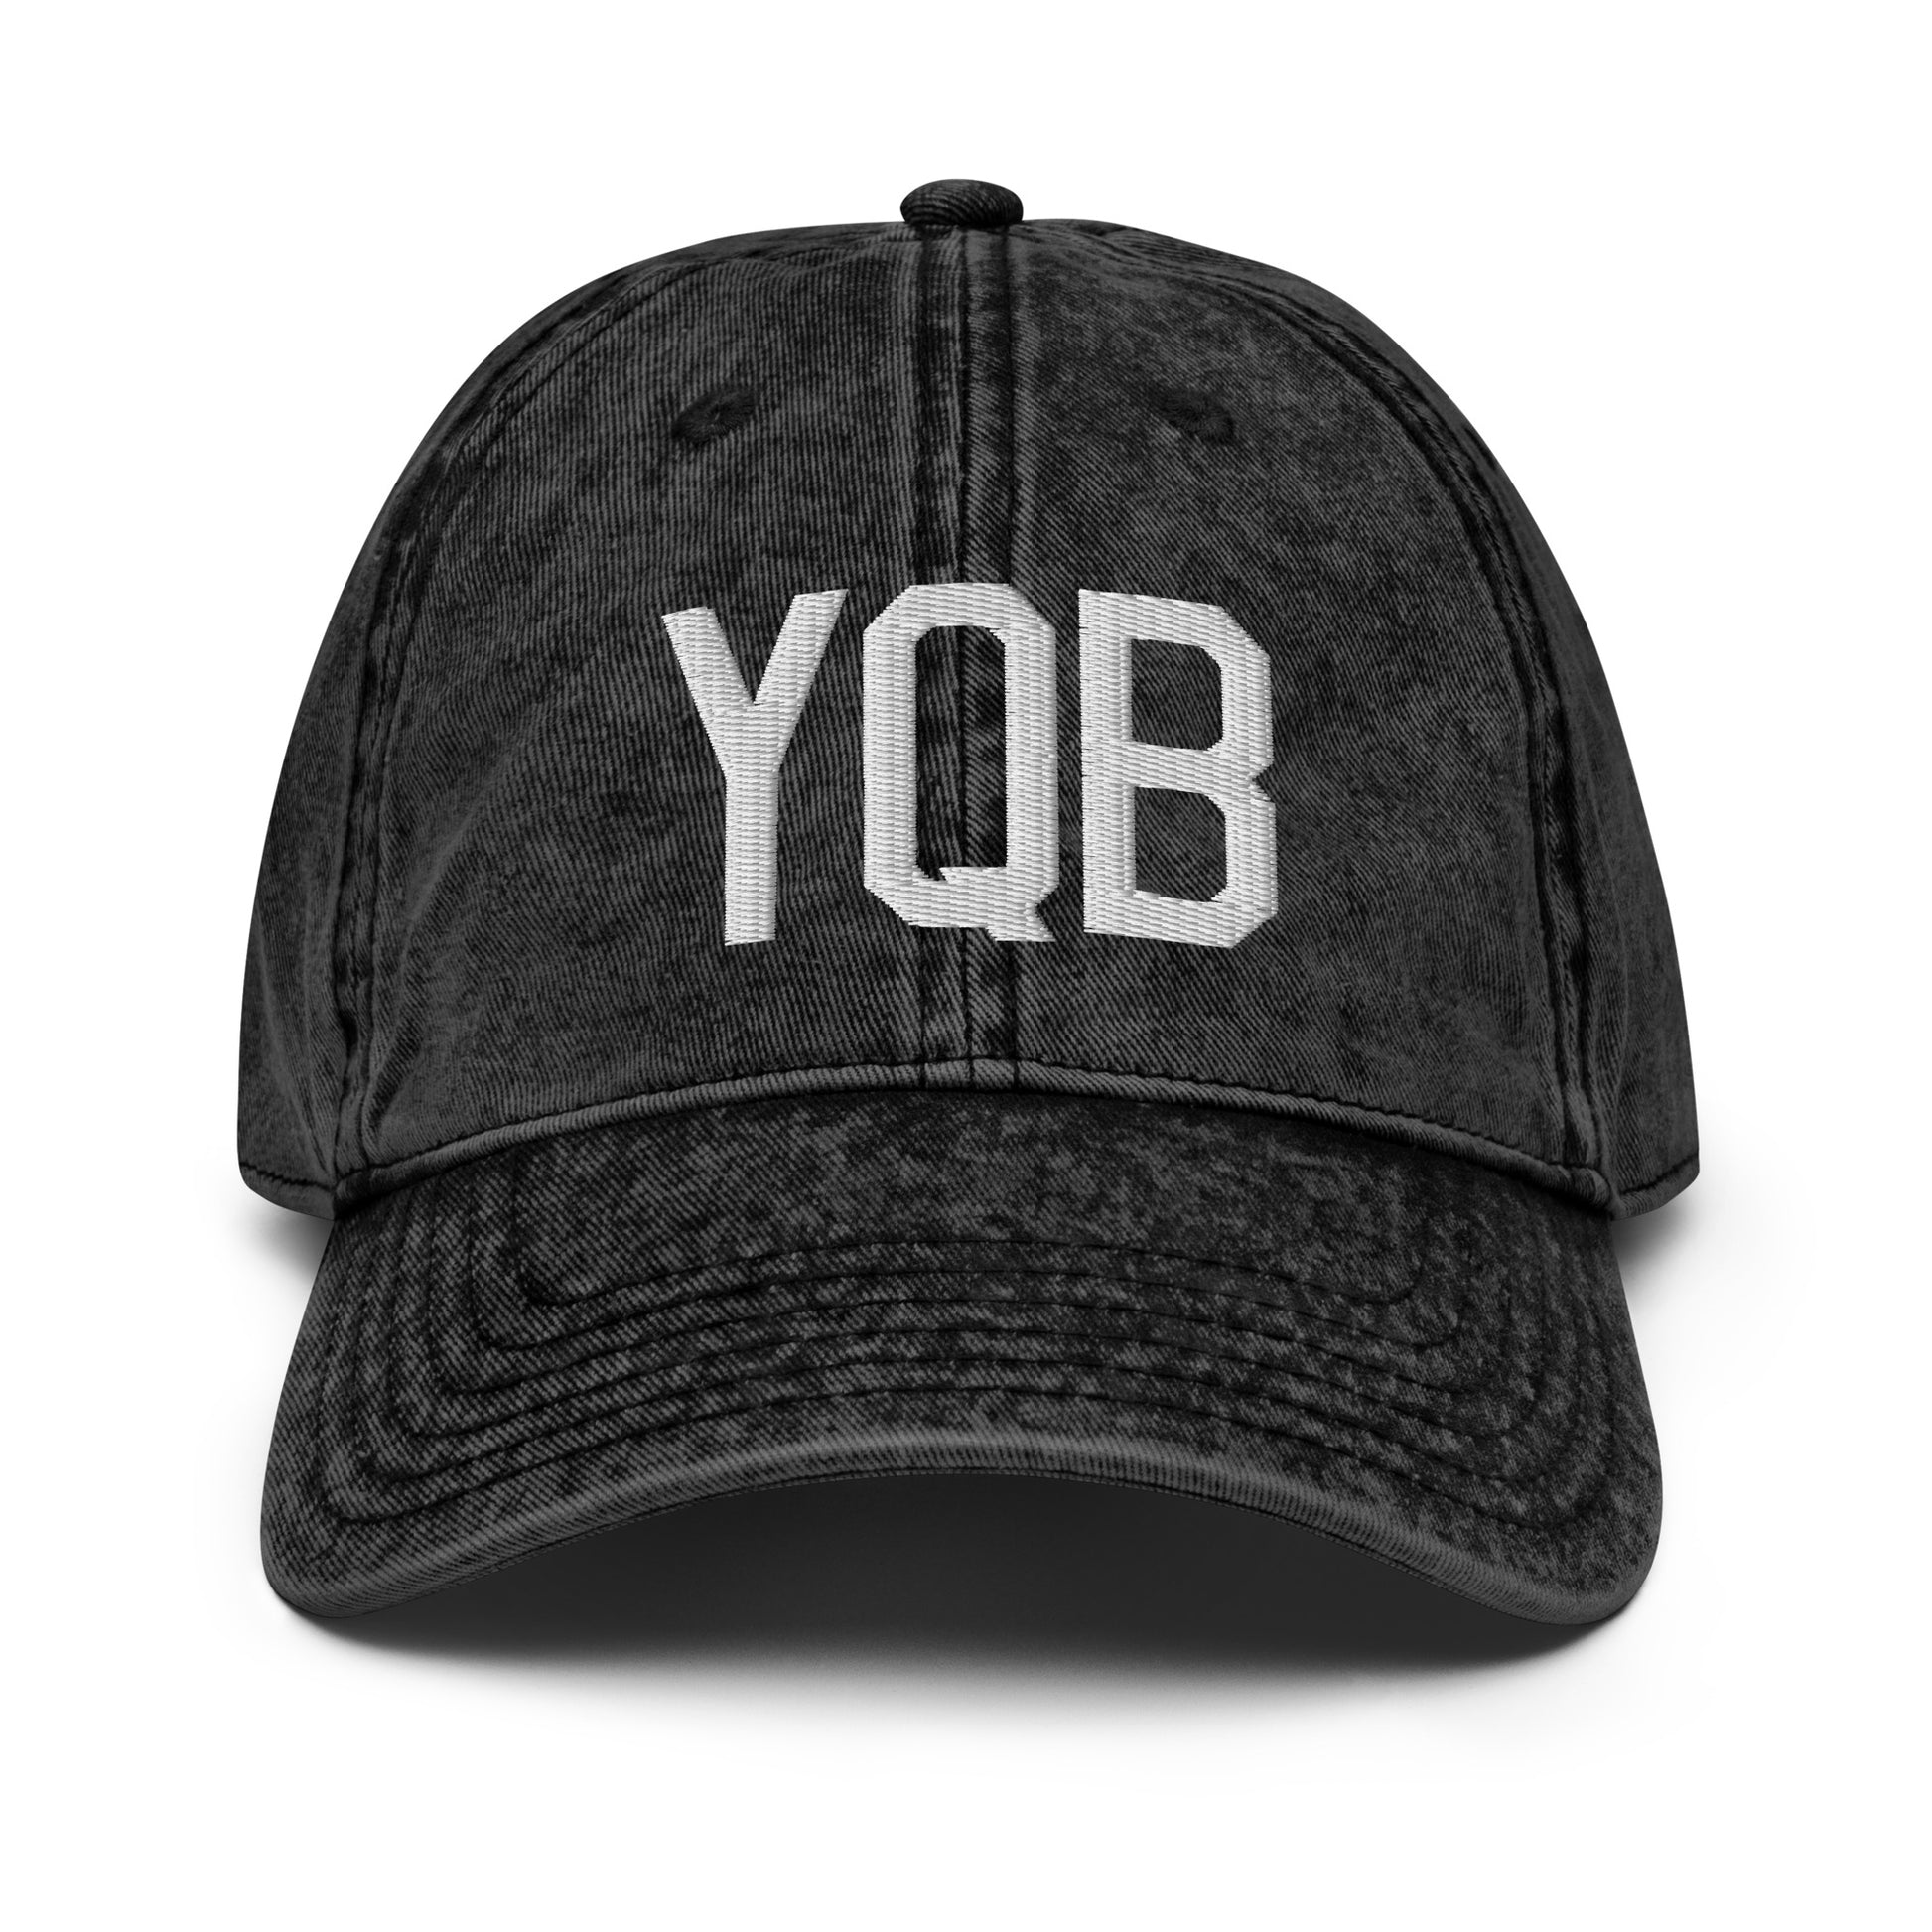 Airport Code Twill Cap - White • YQB Quebec City • YHM Designs - Image 14